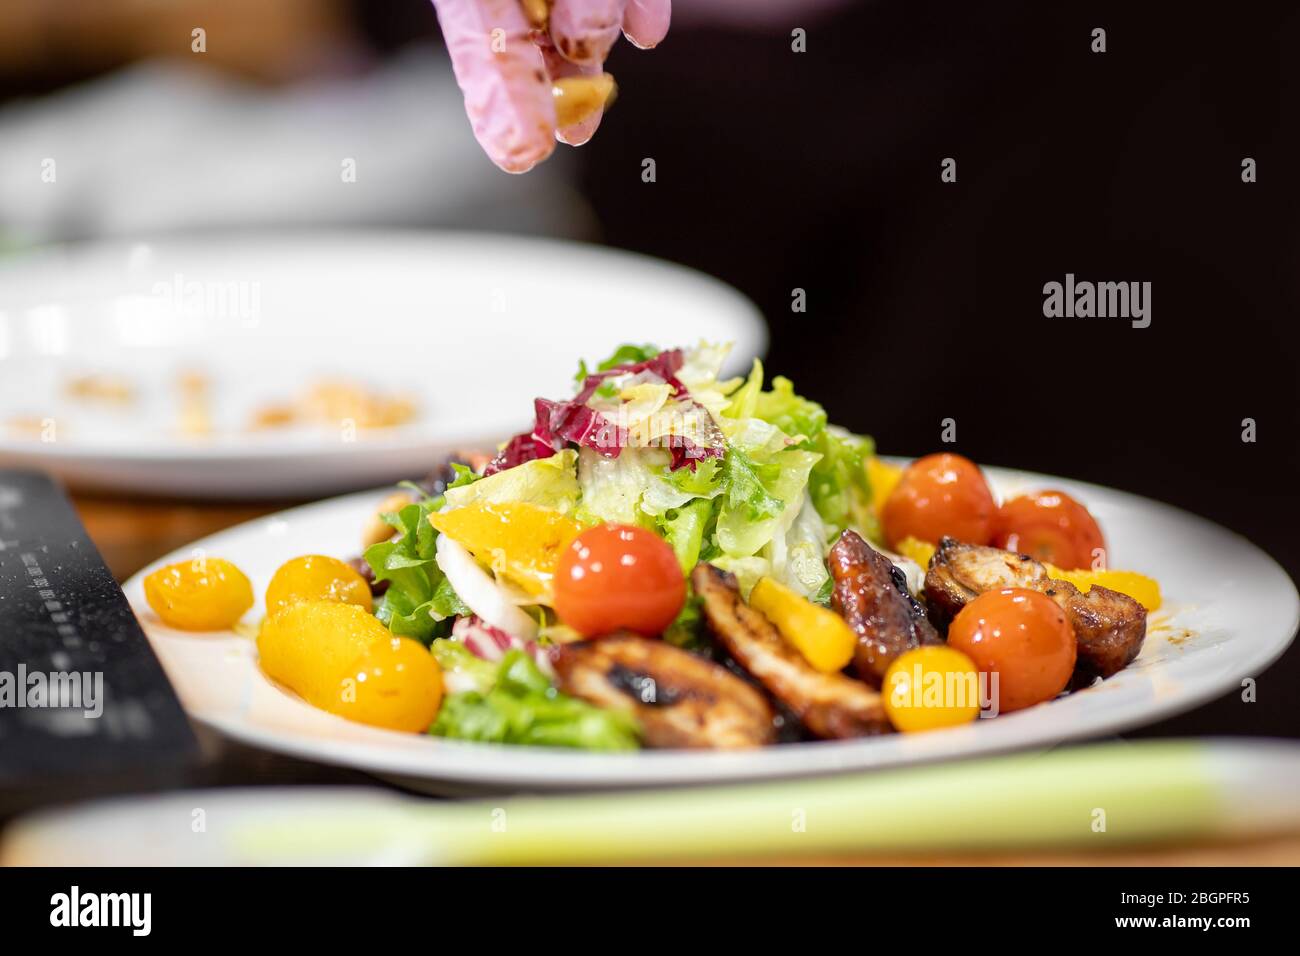 Juicy healthy salad with fried chicken, tomatoes, herbs, oranges, almonds on white plate Stock Photo